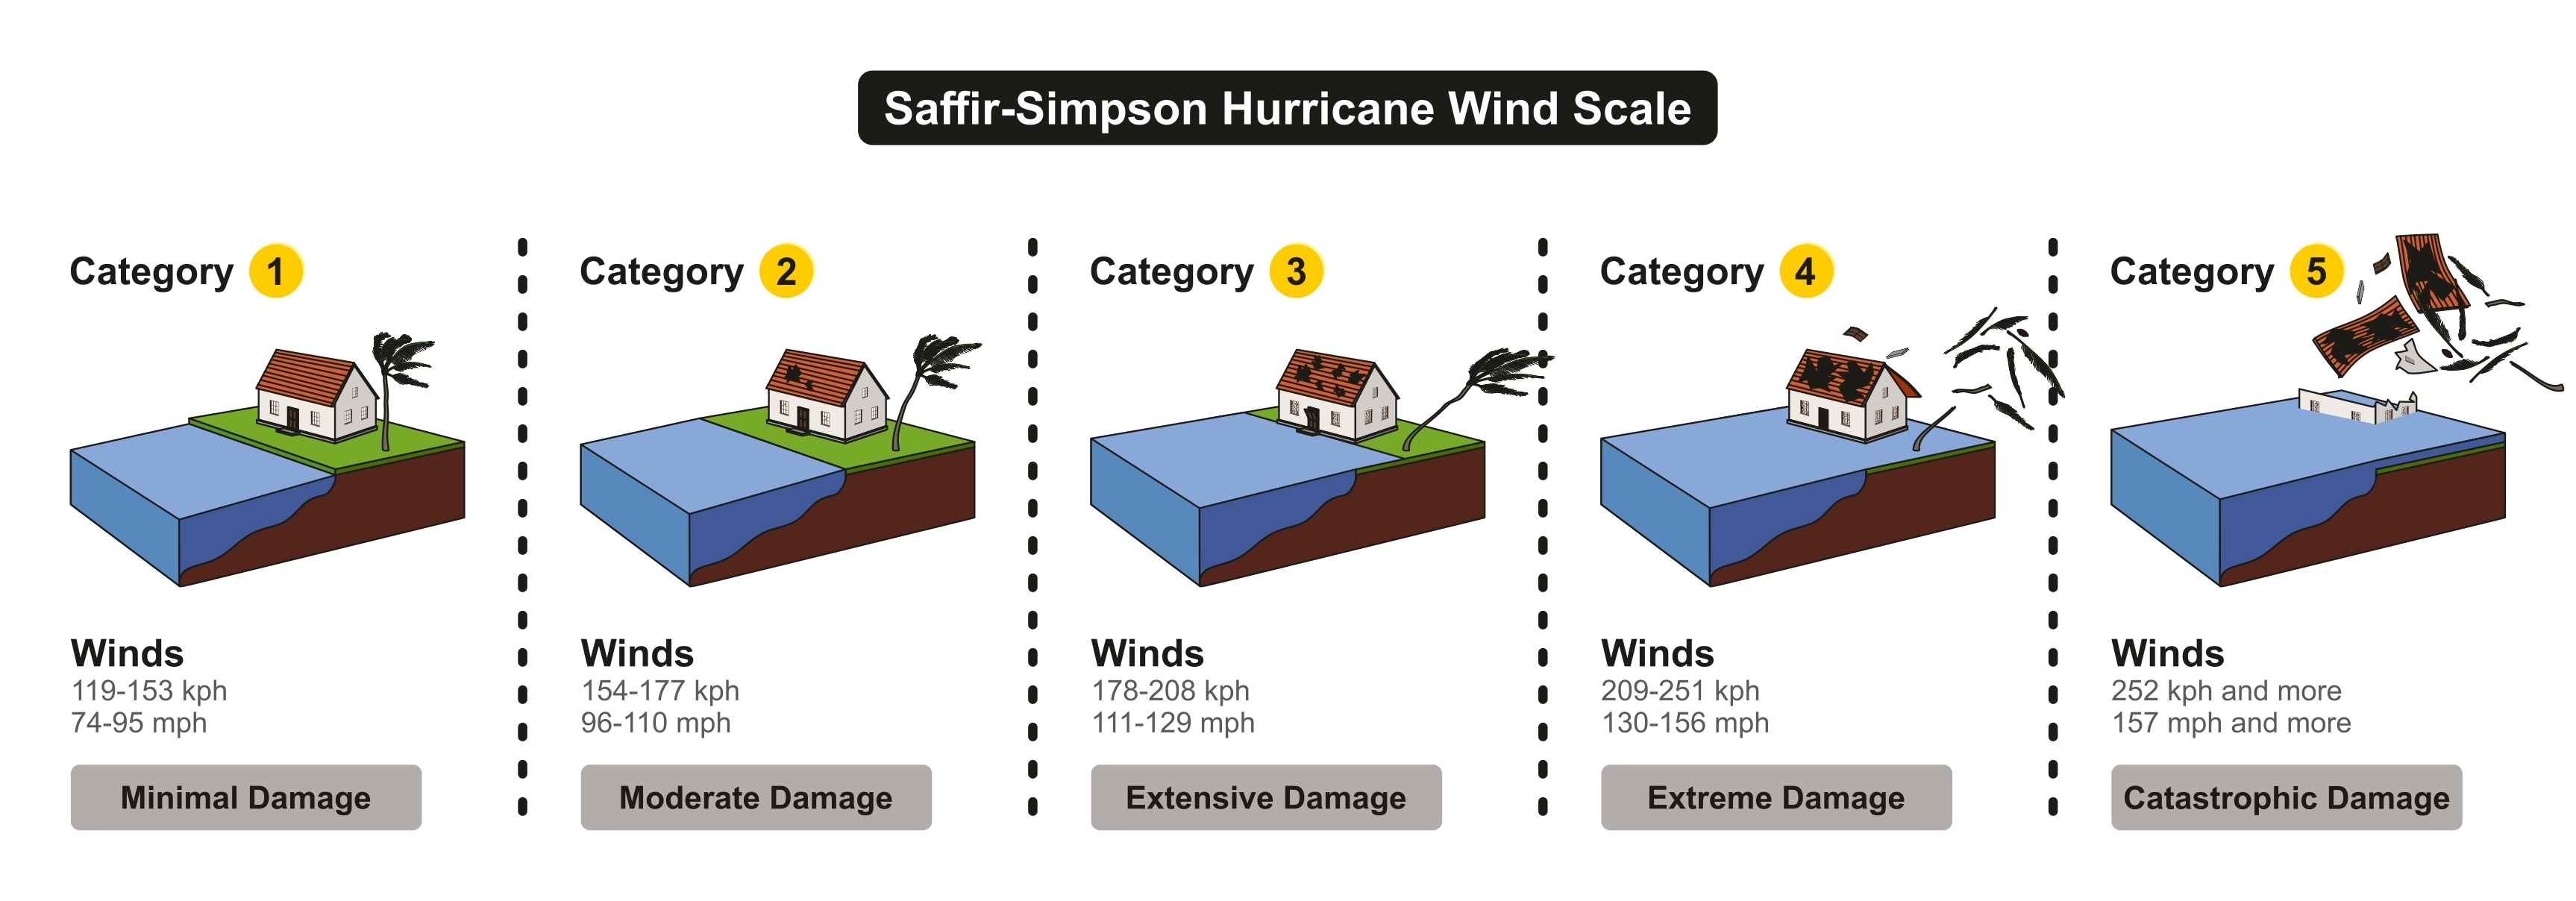 Saffir-Simpson Scale: How strong are the winds in each hurricane category?